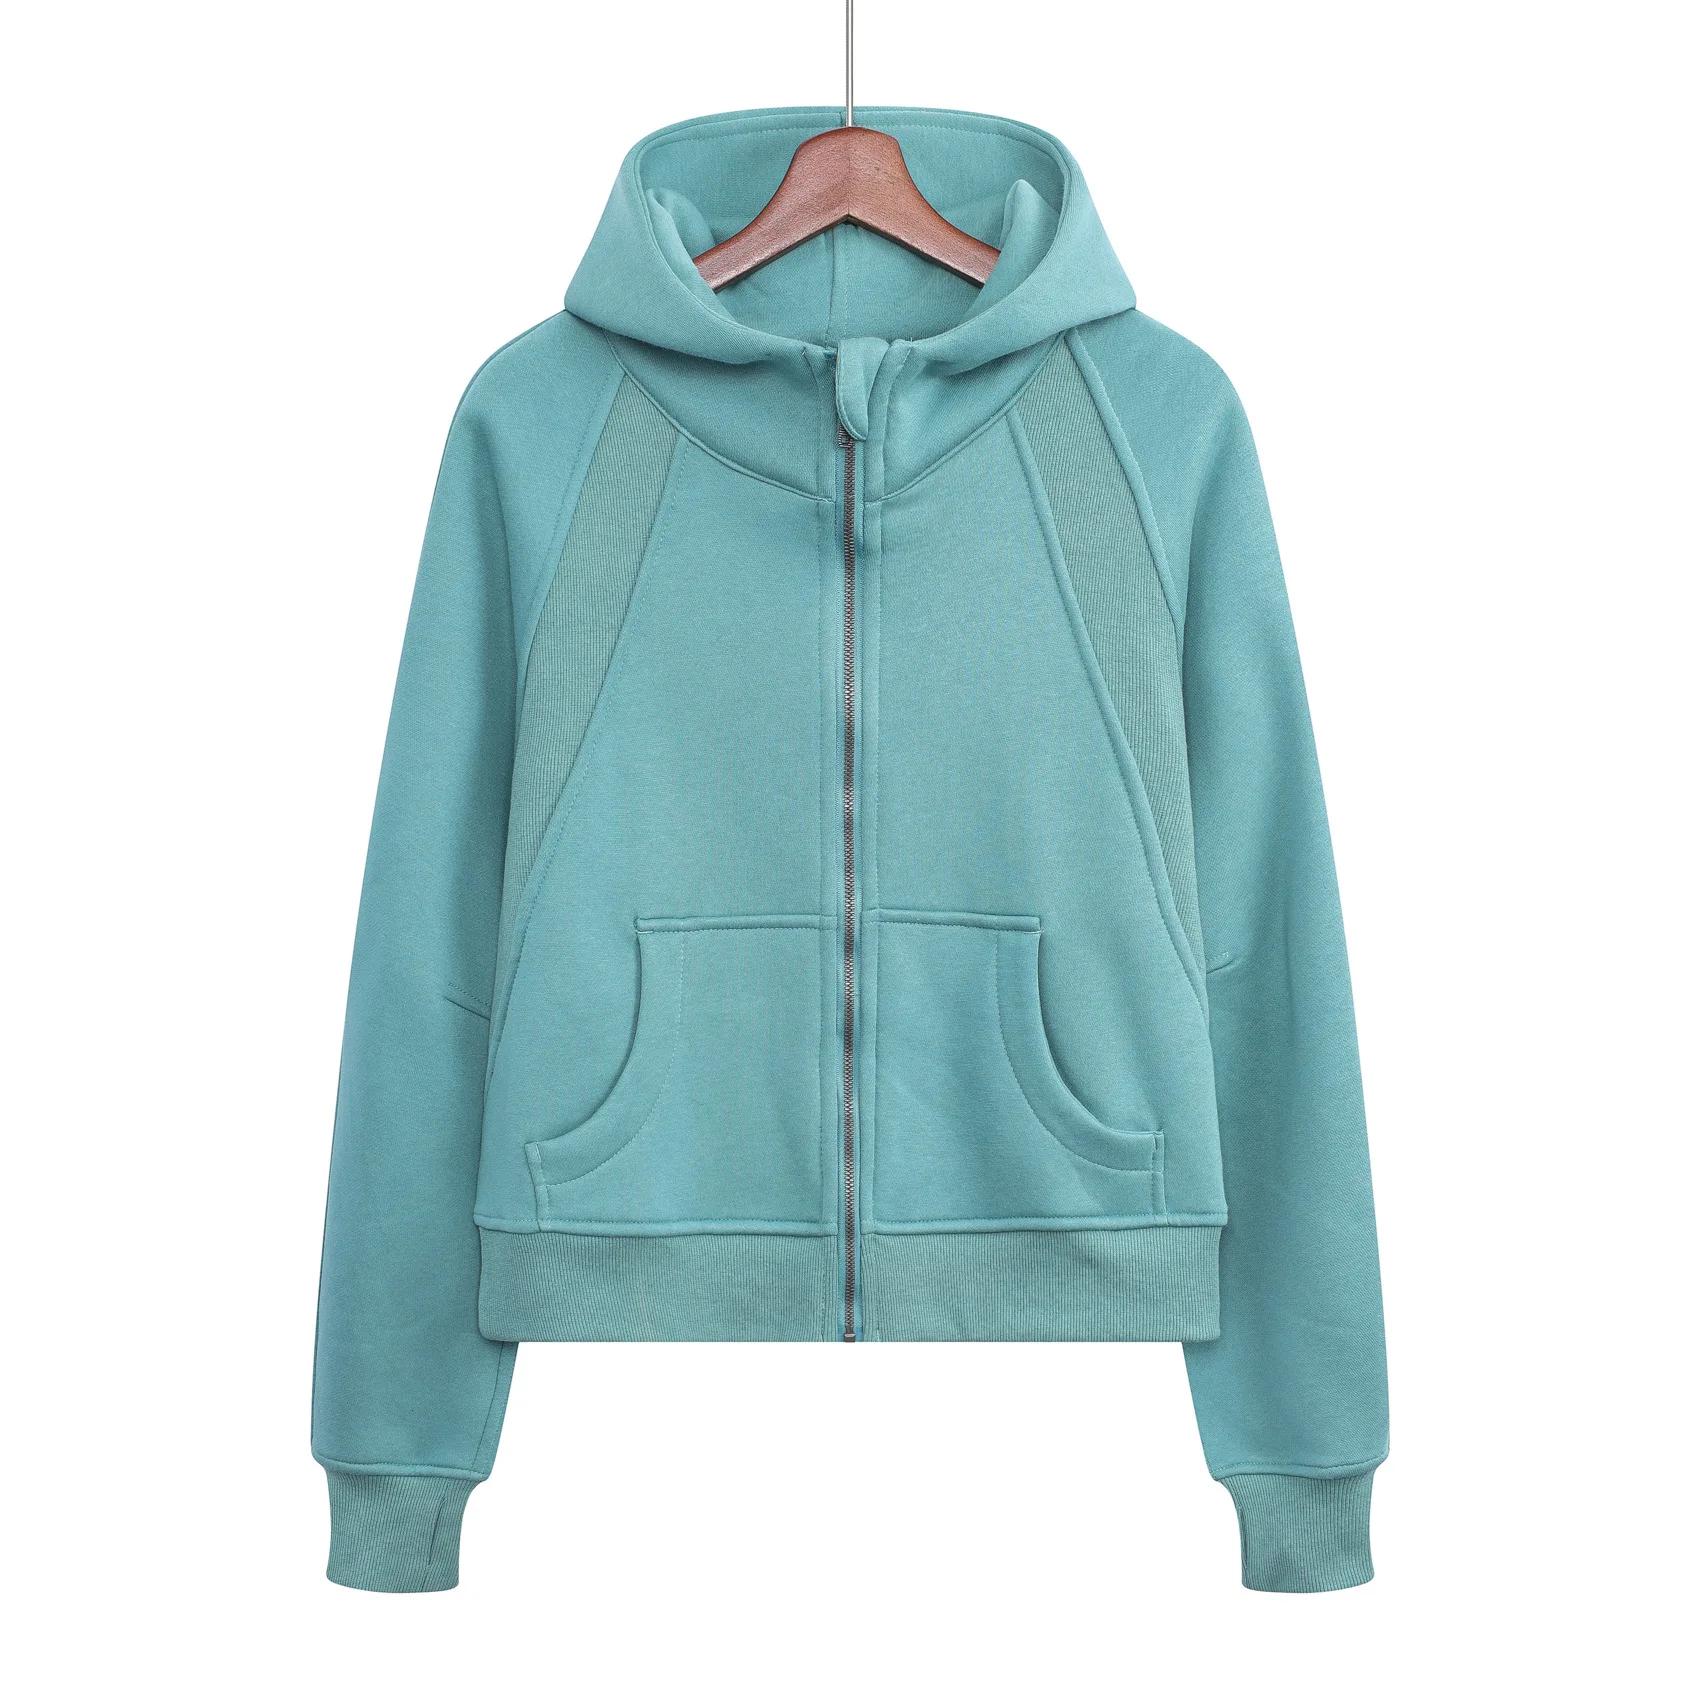 New Autumn And winter Fashion Lulu Ladies Yoga sports leisure full zipper embroidered coat plus velvet hooded sweater